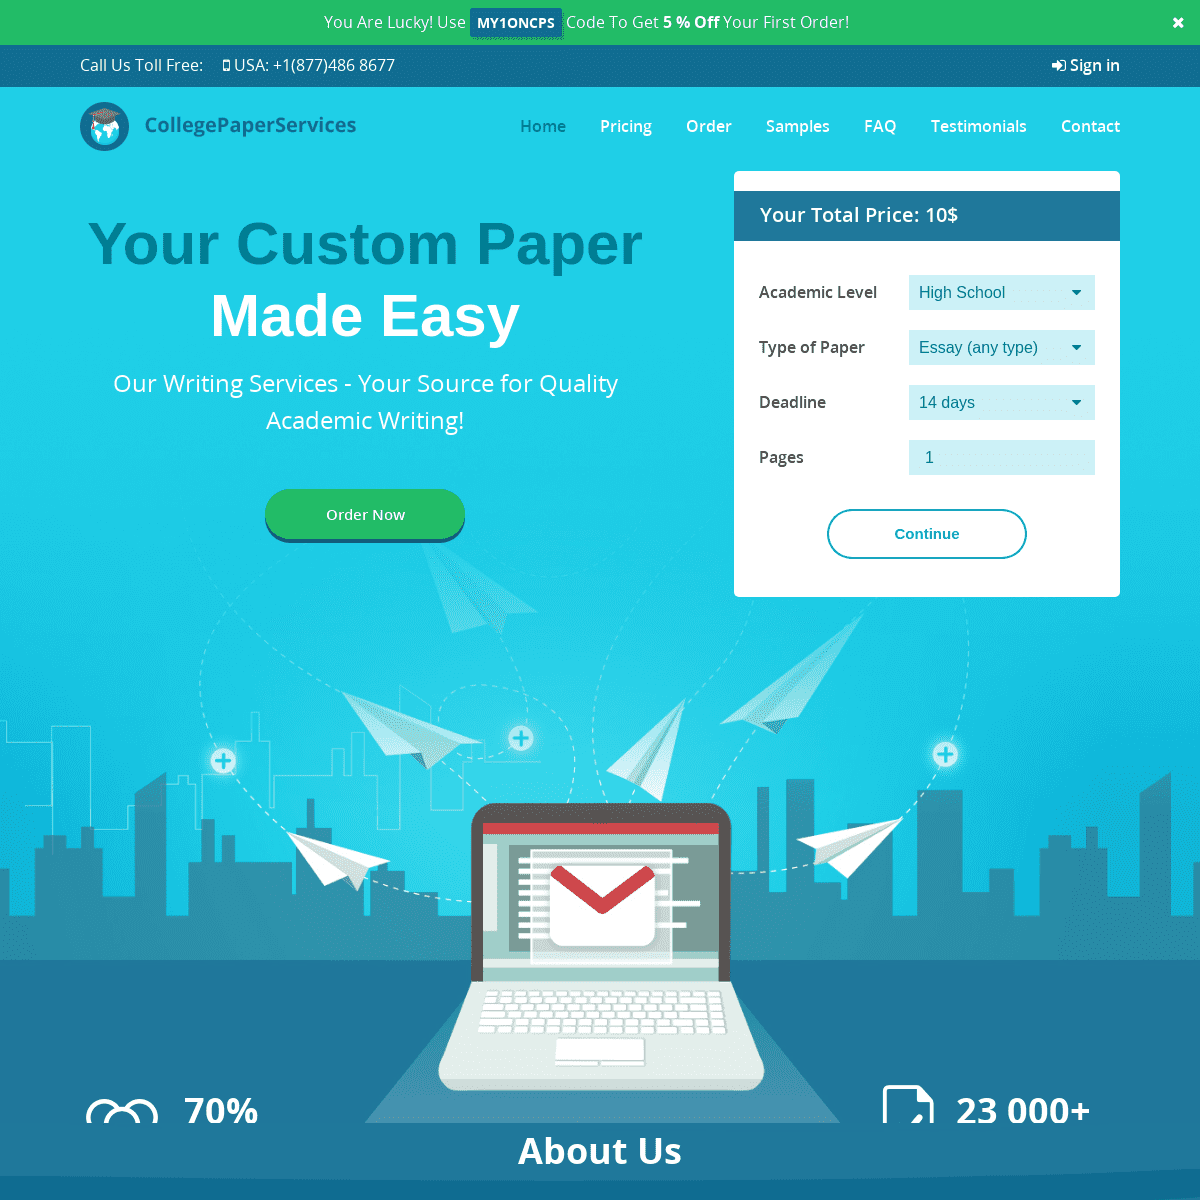 A complete backup of https://collegepaperservices.com